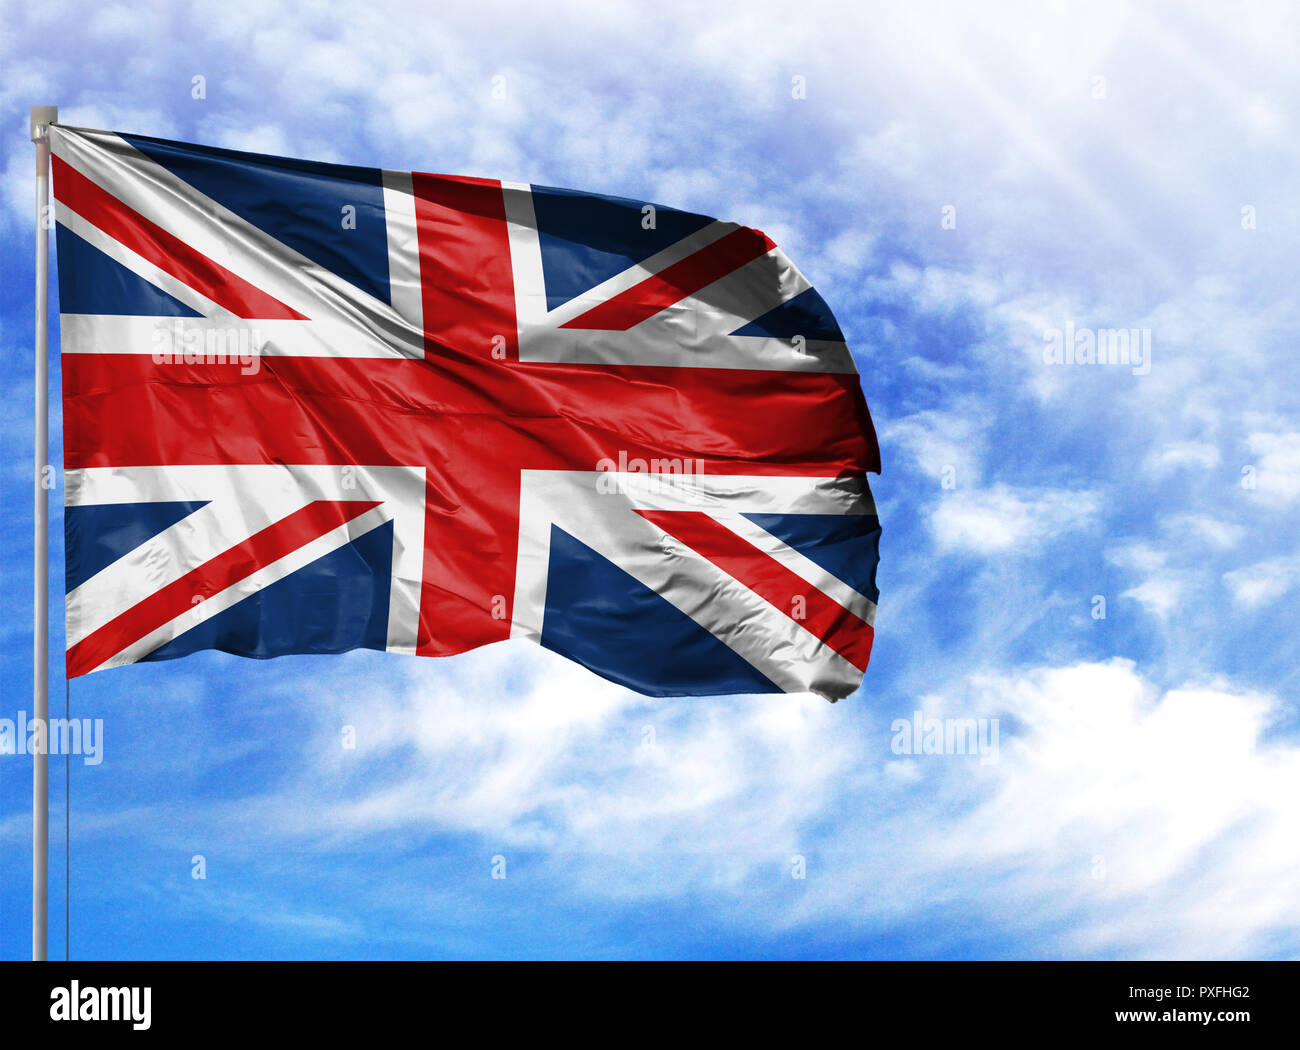 National flag of United Kingdom on a flagpole in front of blue sky. Stock Photo